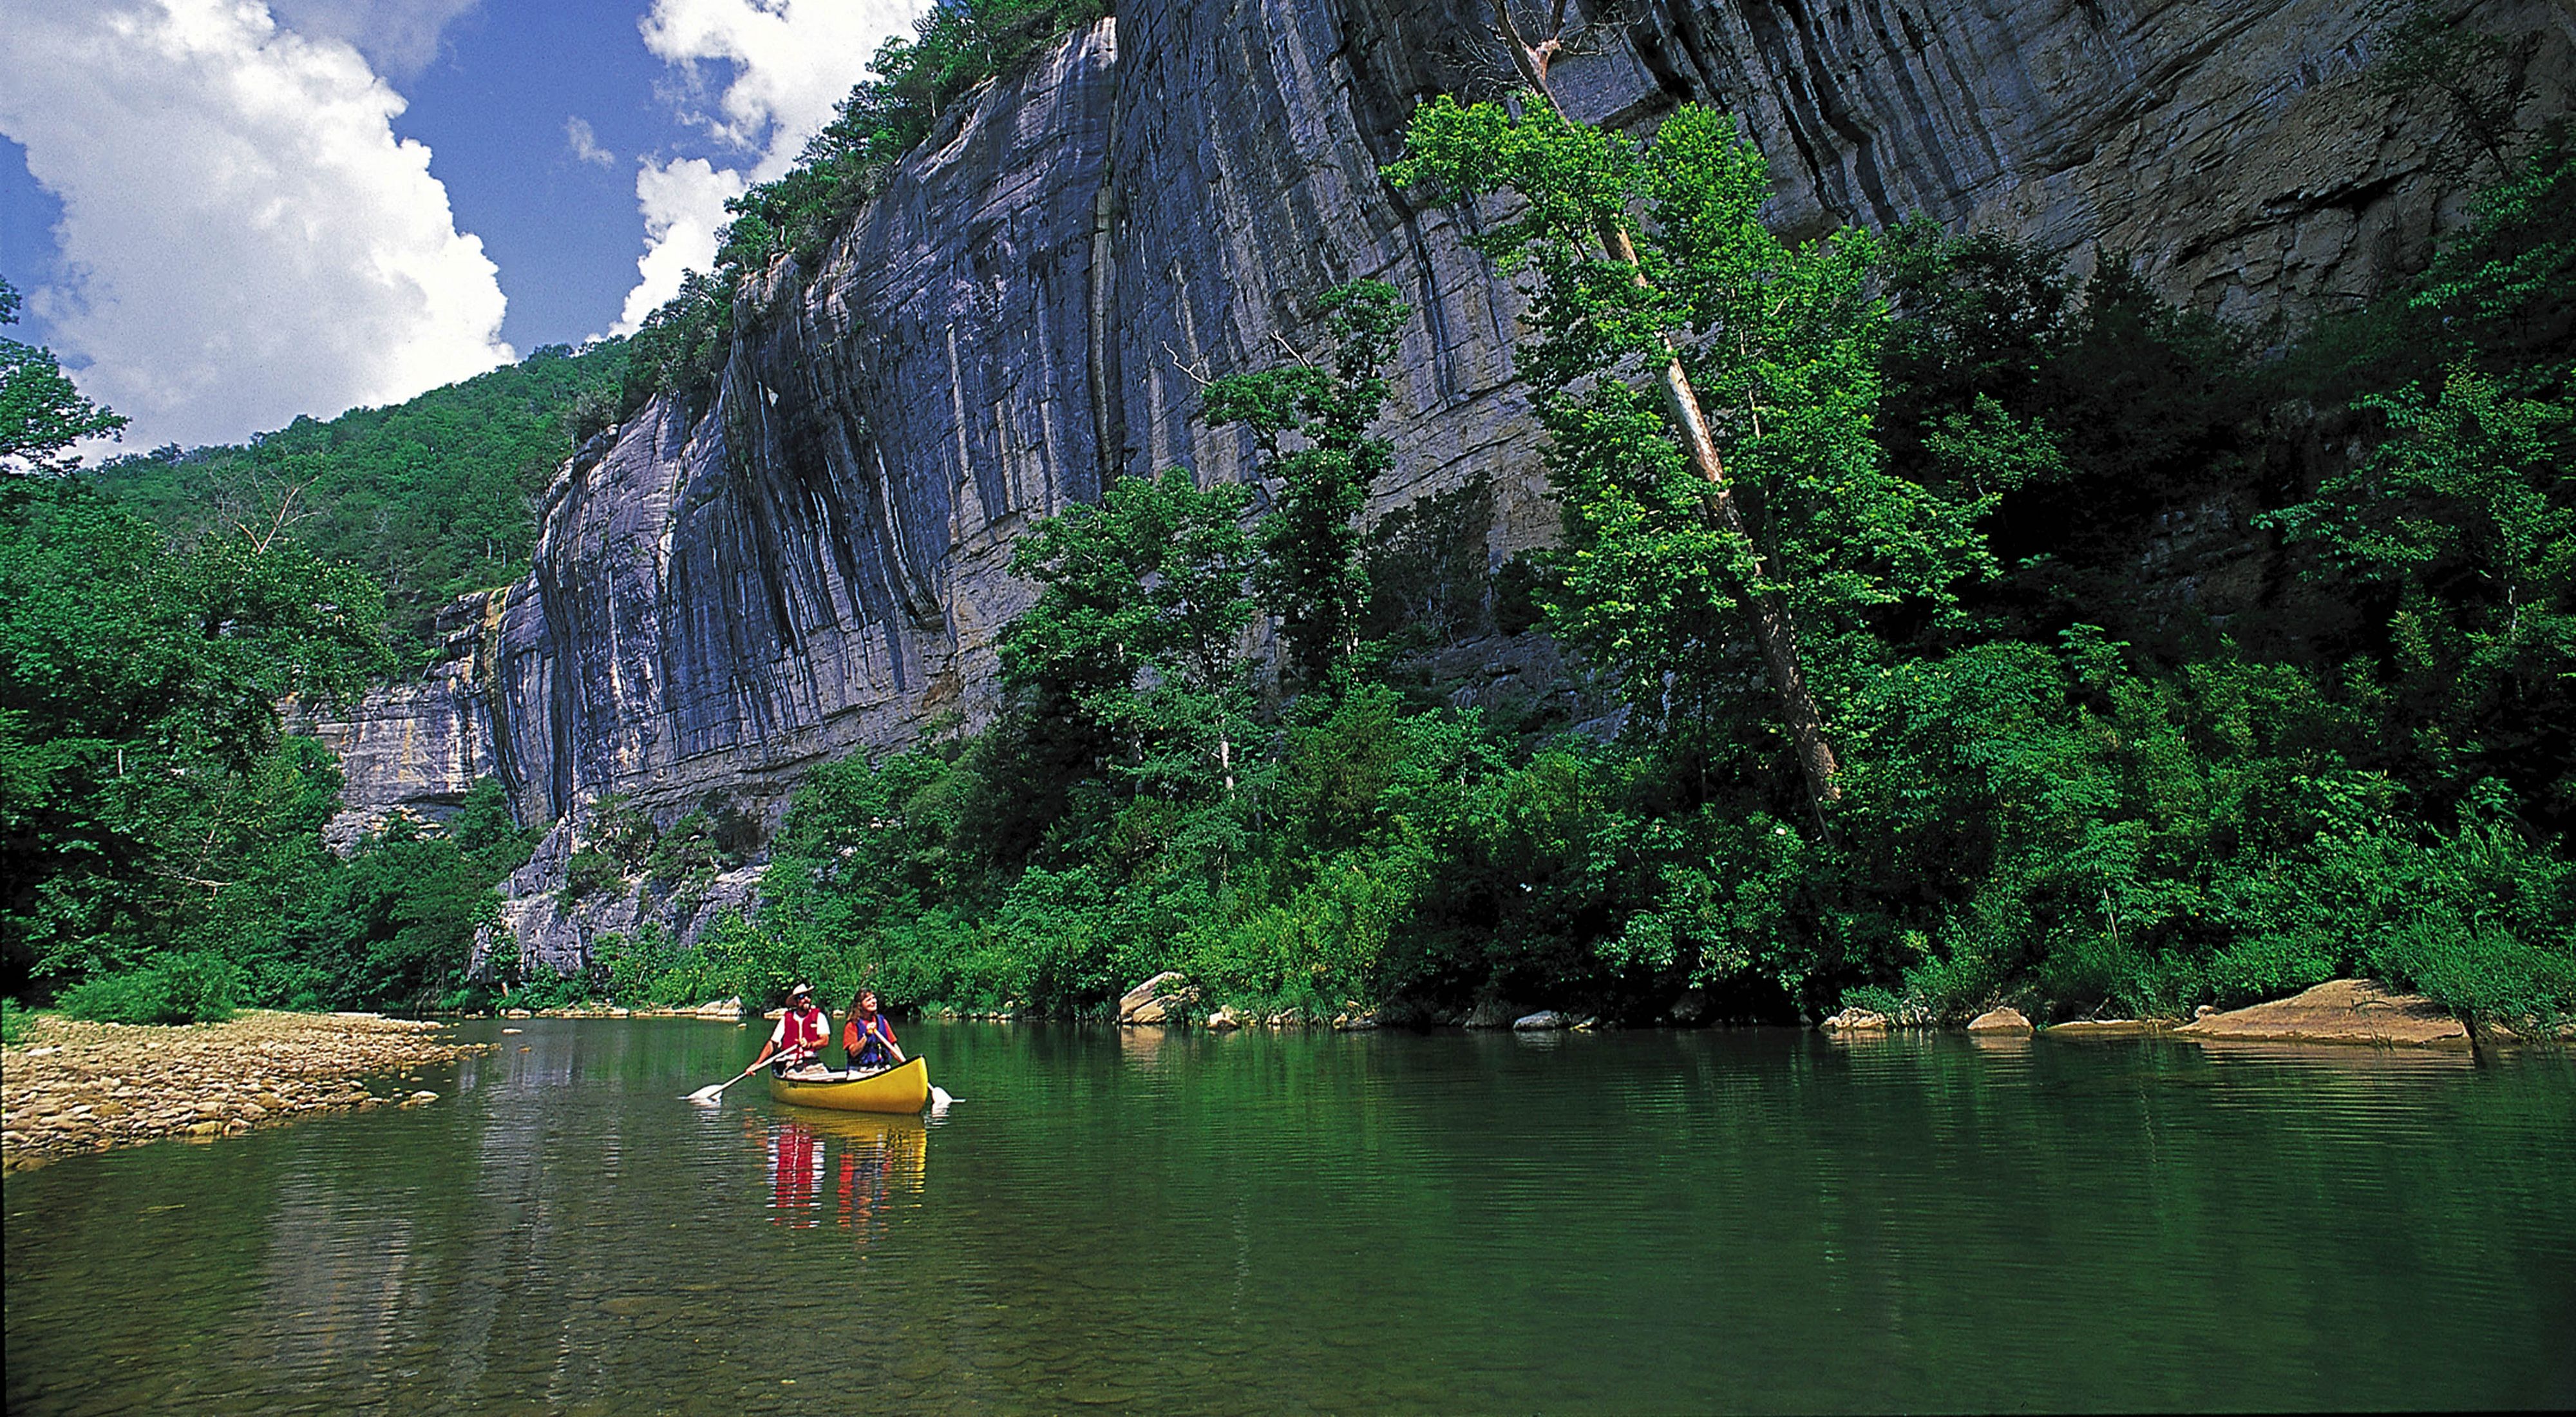 Two people canoeing on the Buffalo River with rocky cliffs along one bank.